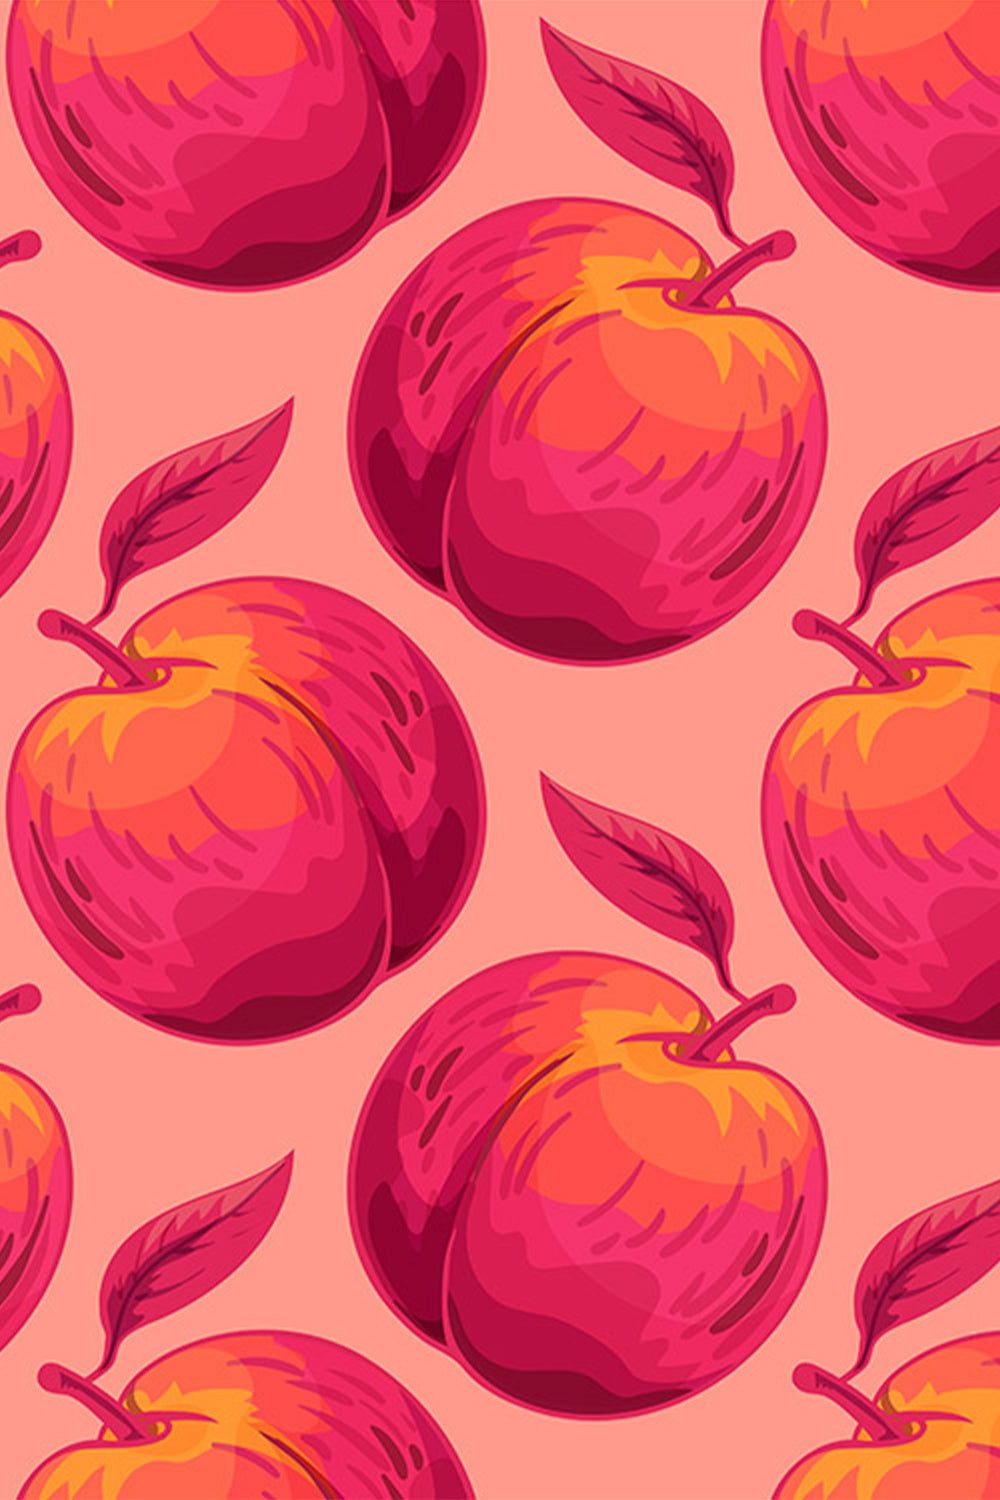 A repeating pattern of red and orange apples on a pink background - Pink, peach